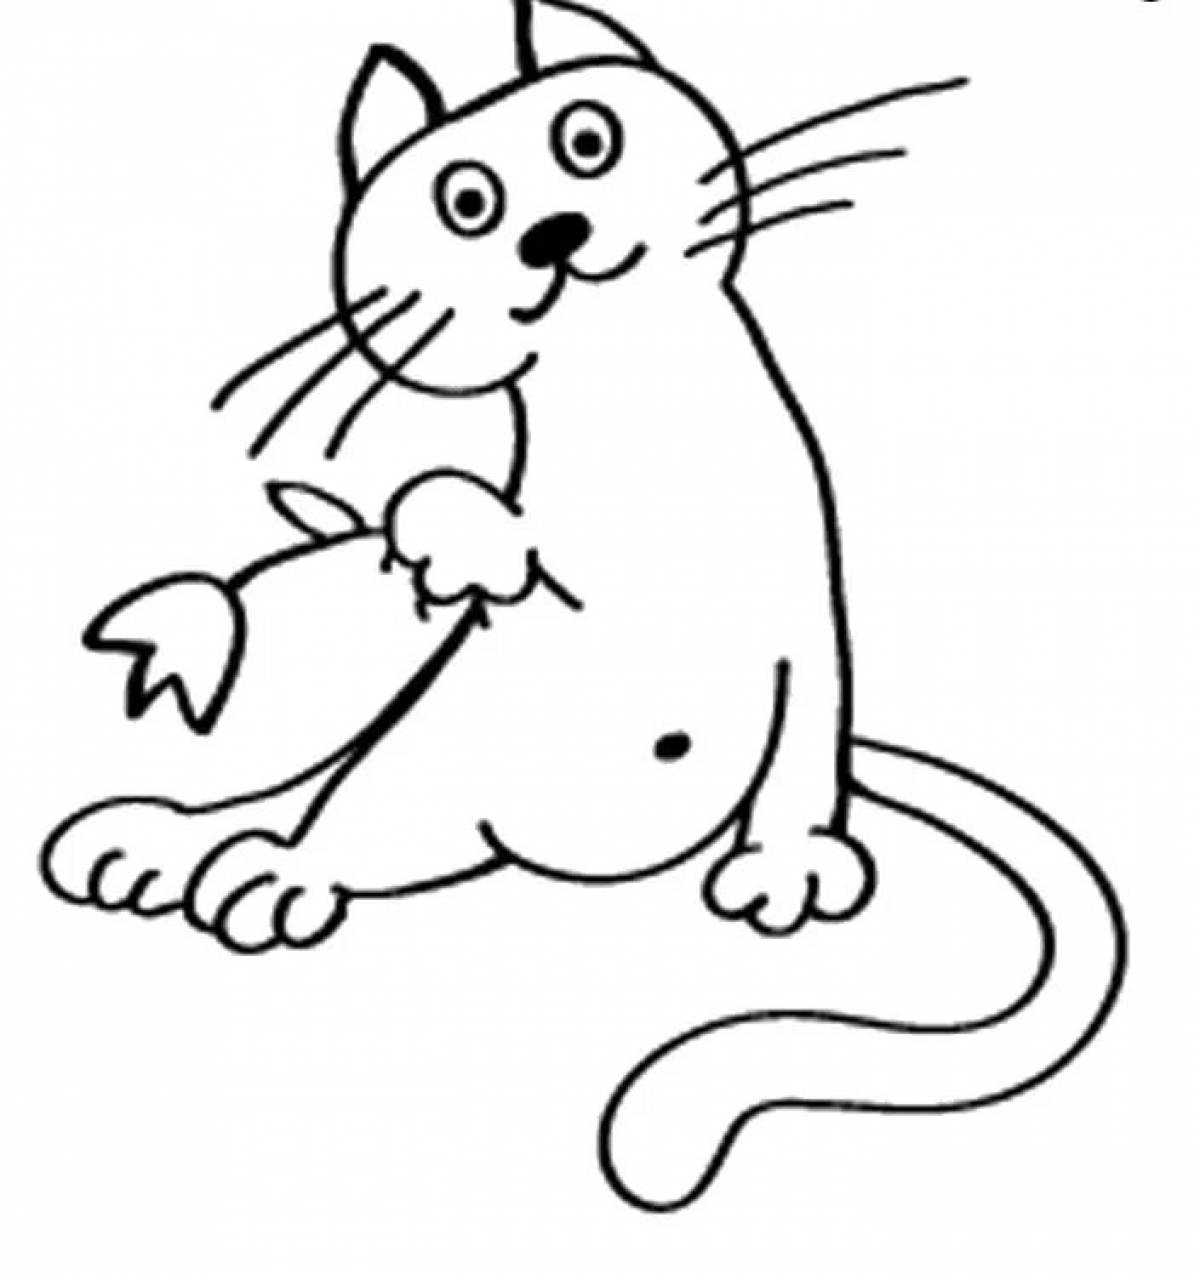 Rampant cat and mouse coloring page